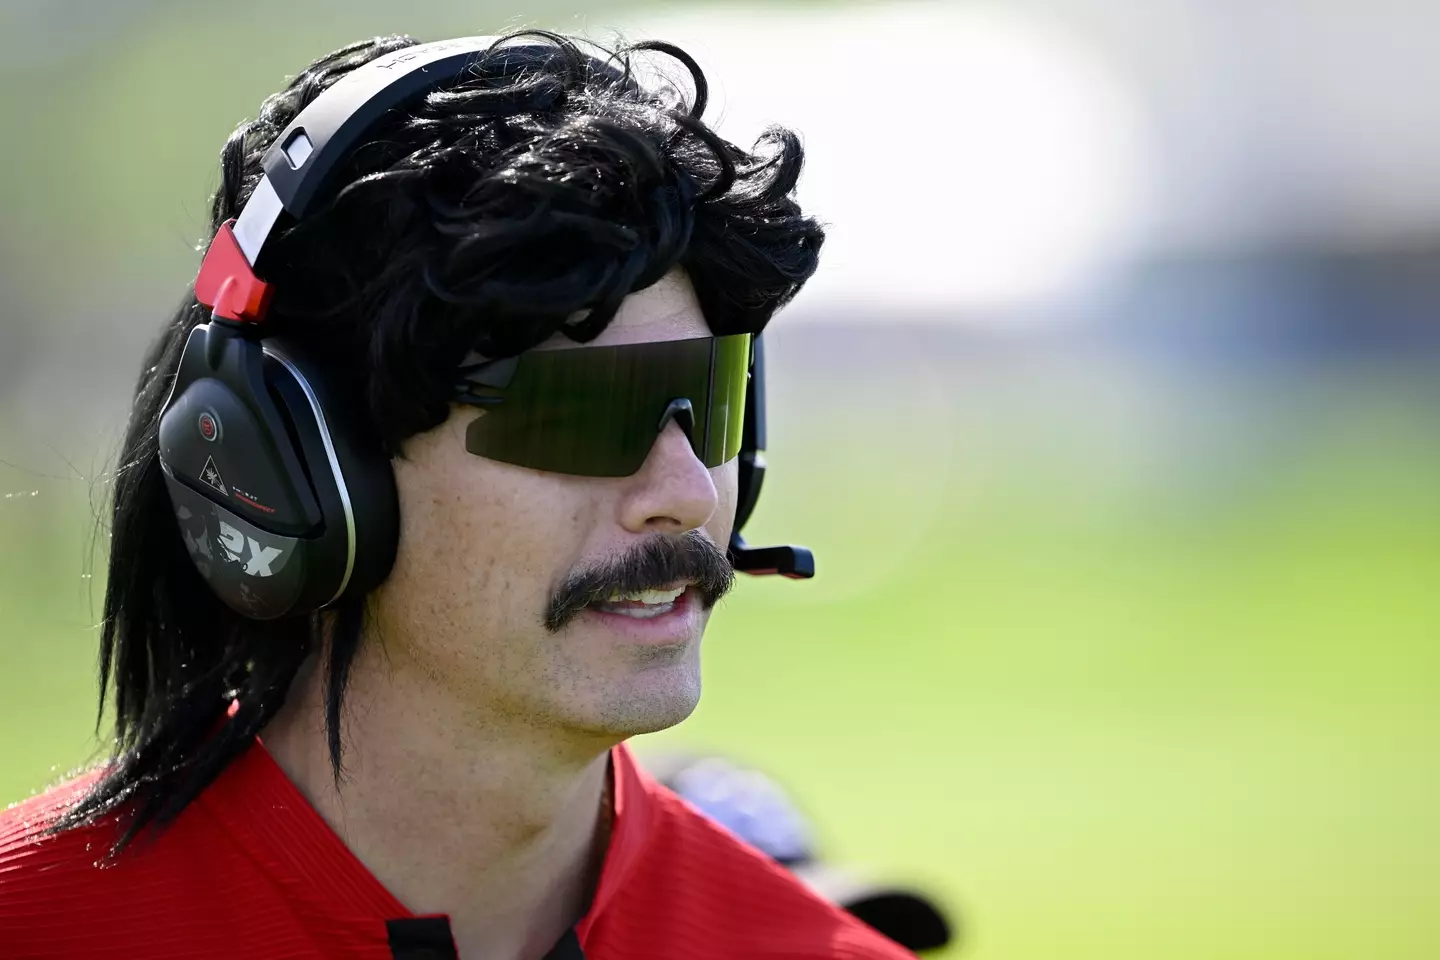 Dr DisRespect was banned from Twitch in 2020. (Orlando Ramirez/Getty Images)